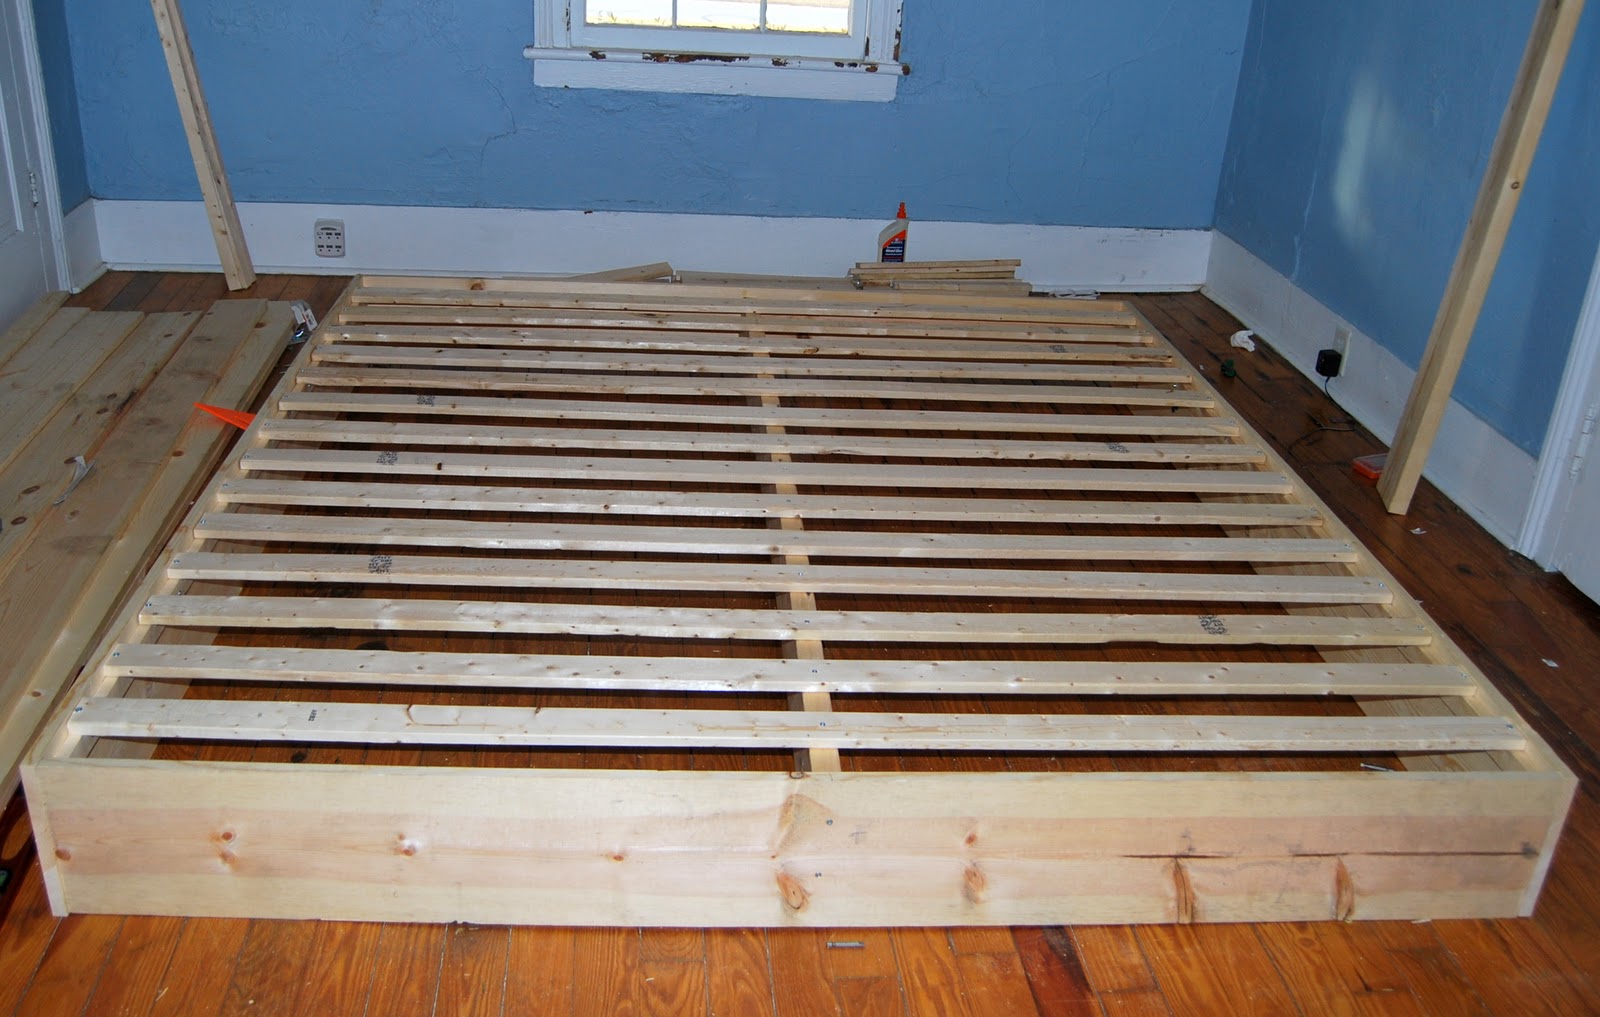 Building a Box Bed Frame